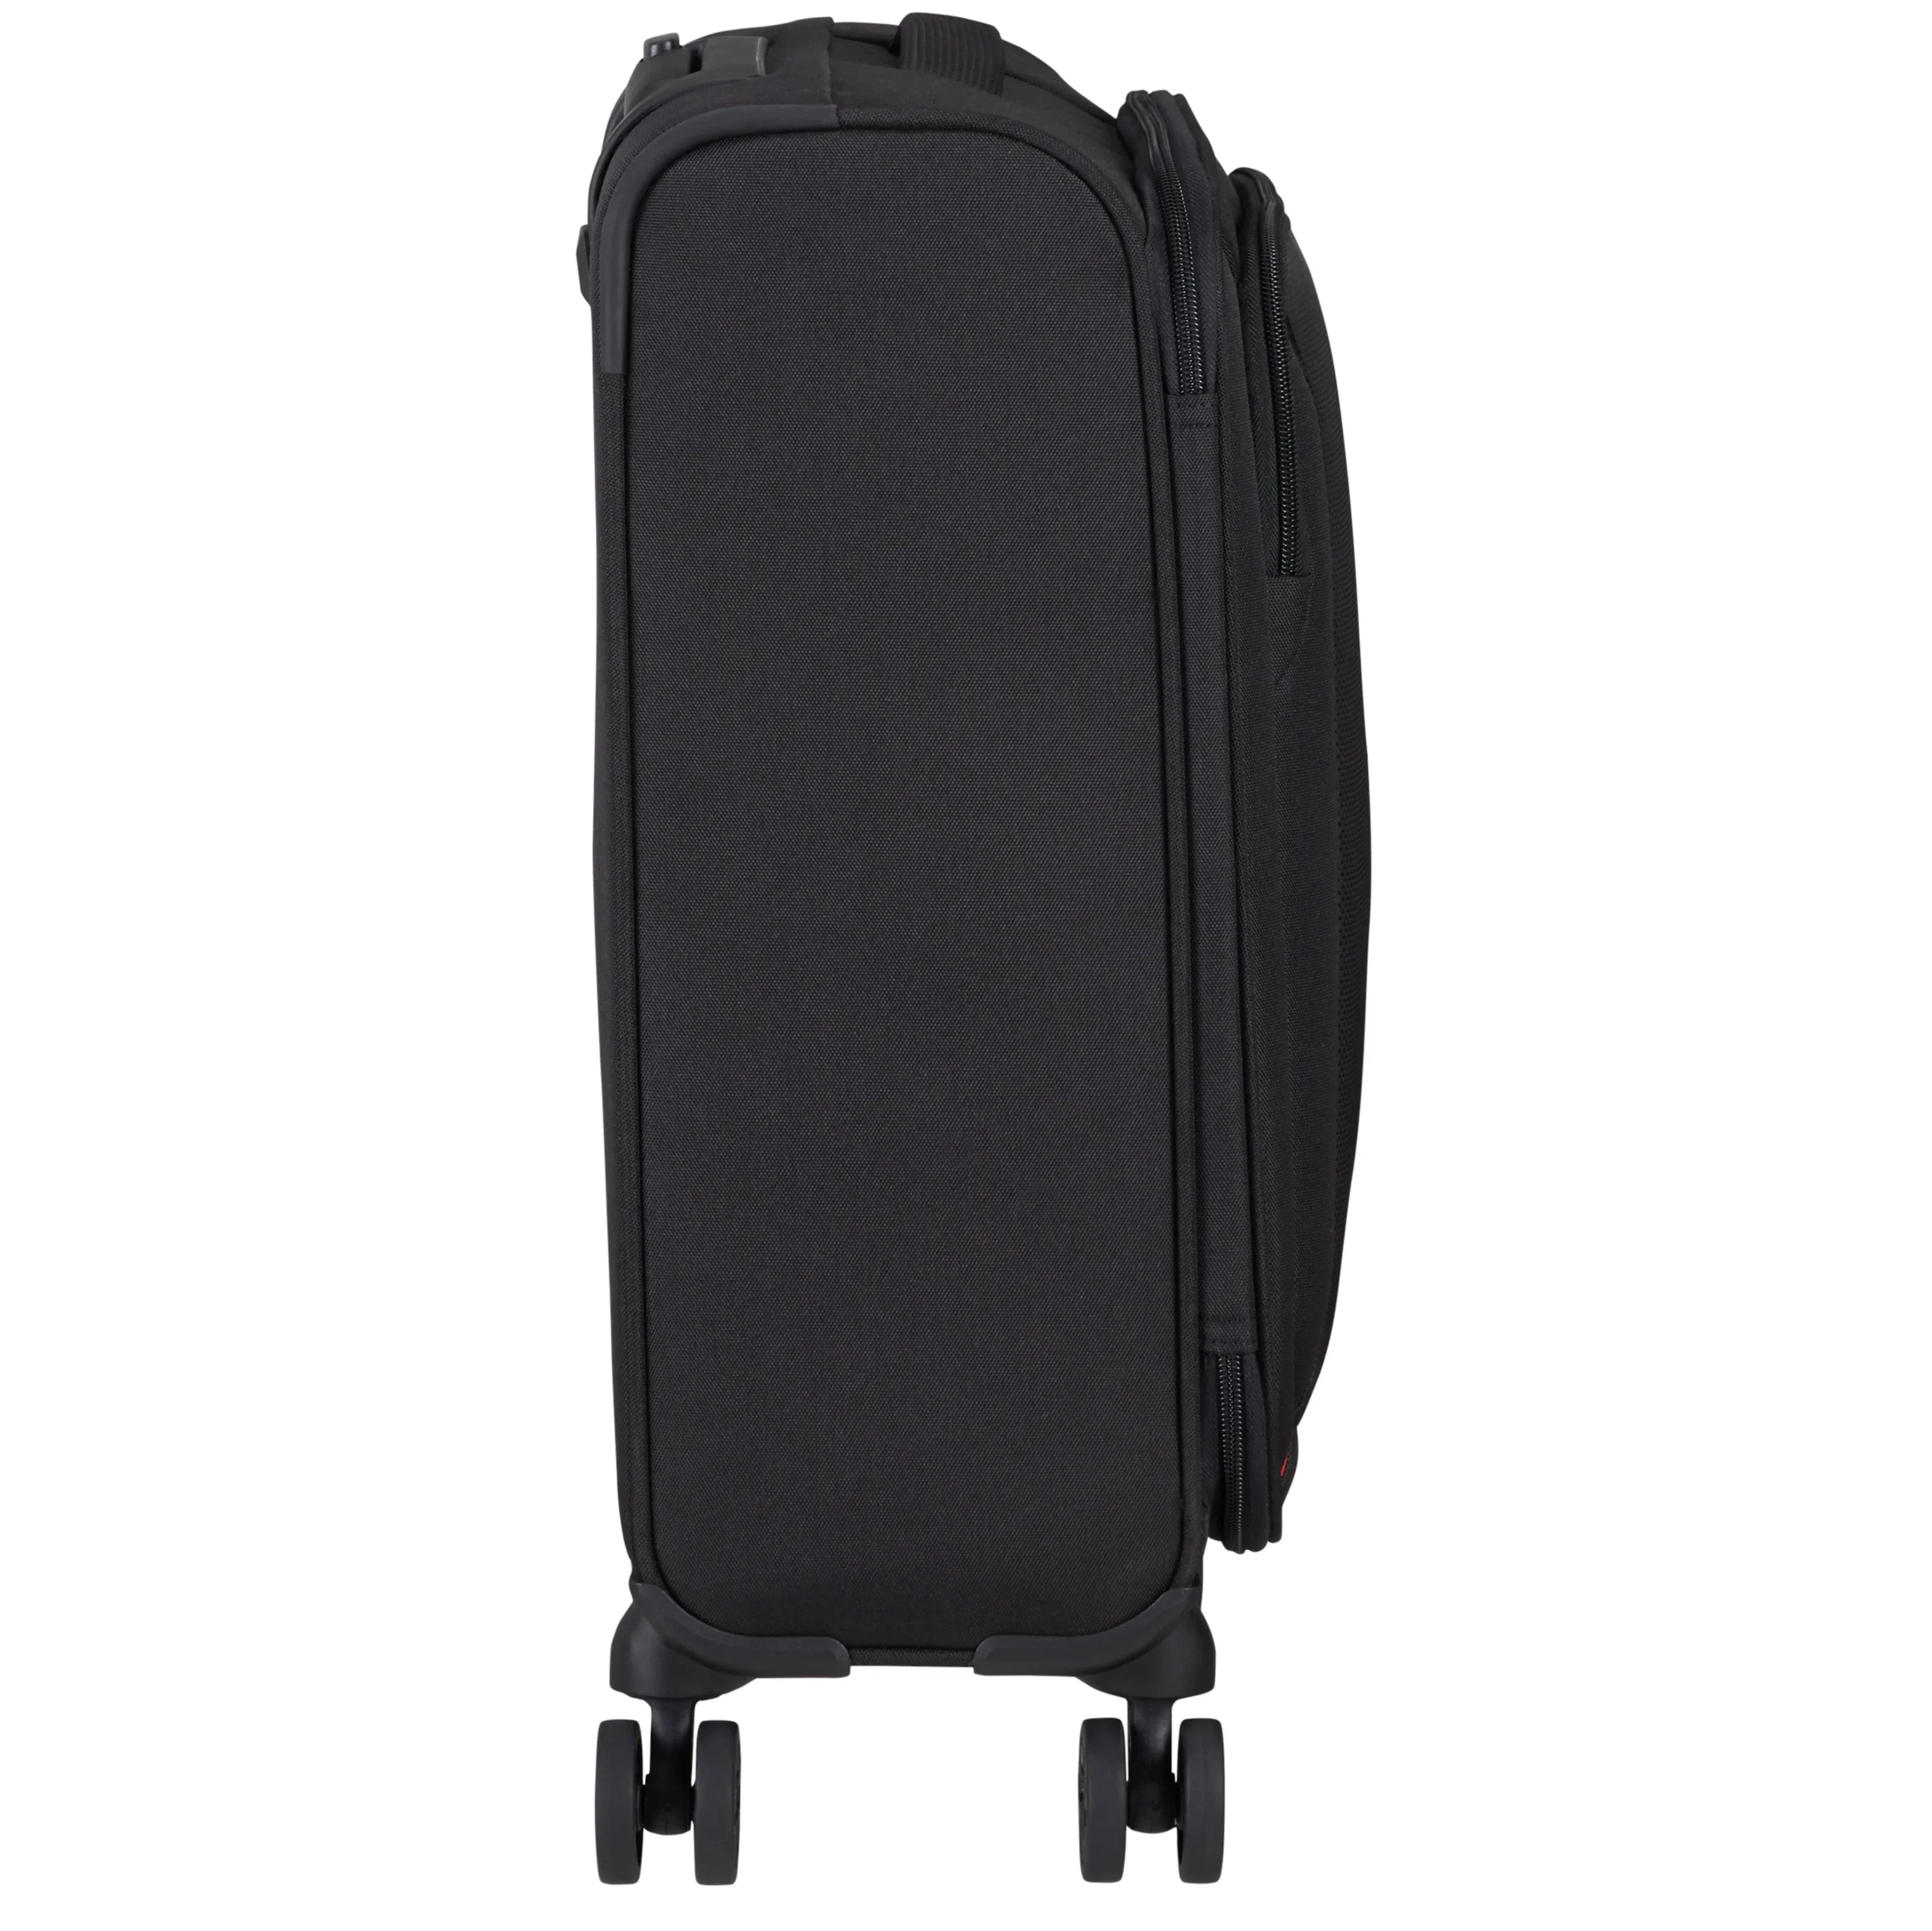 American Tourister Hyperspeed trolley cabine 4 roues 55 cm - marine de combat